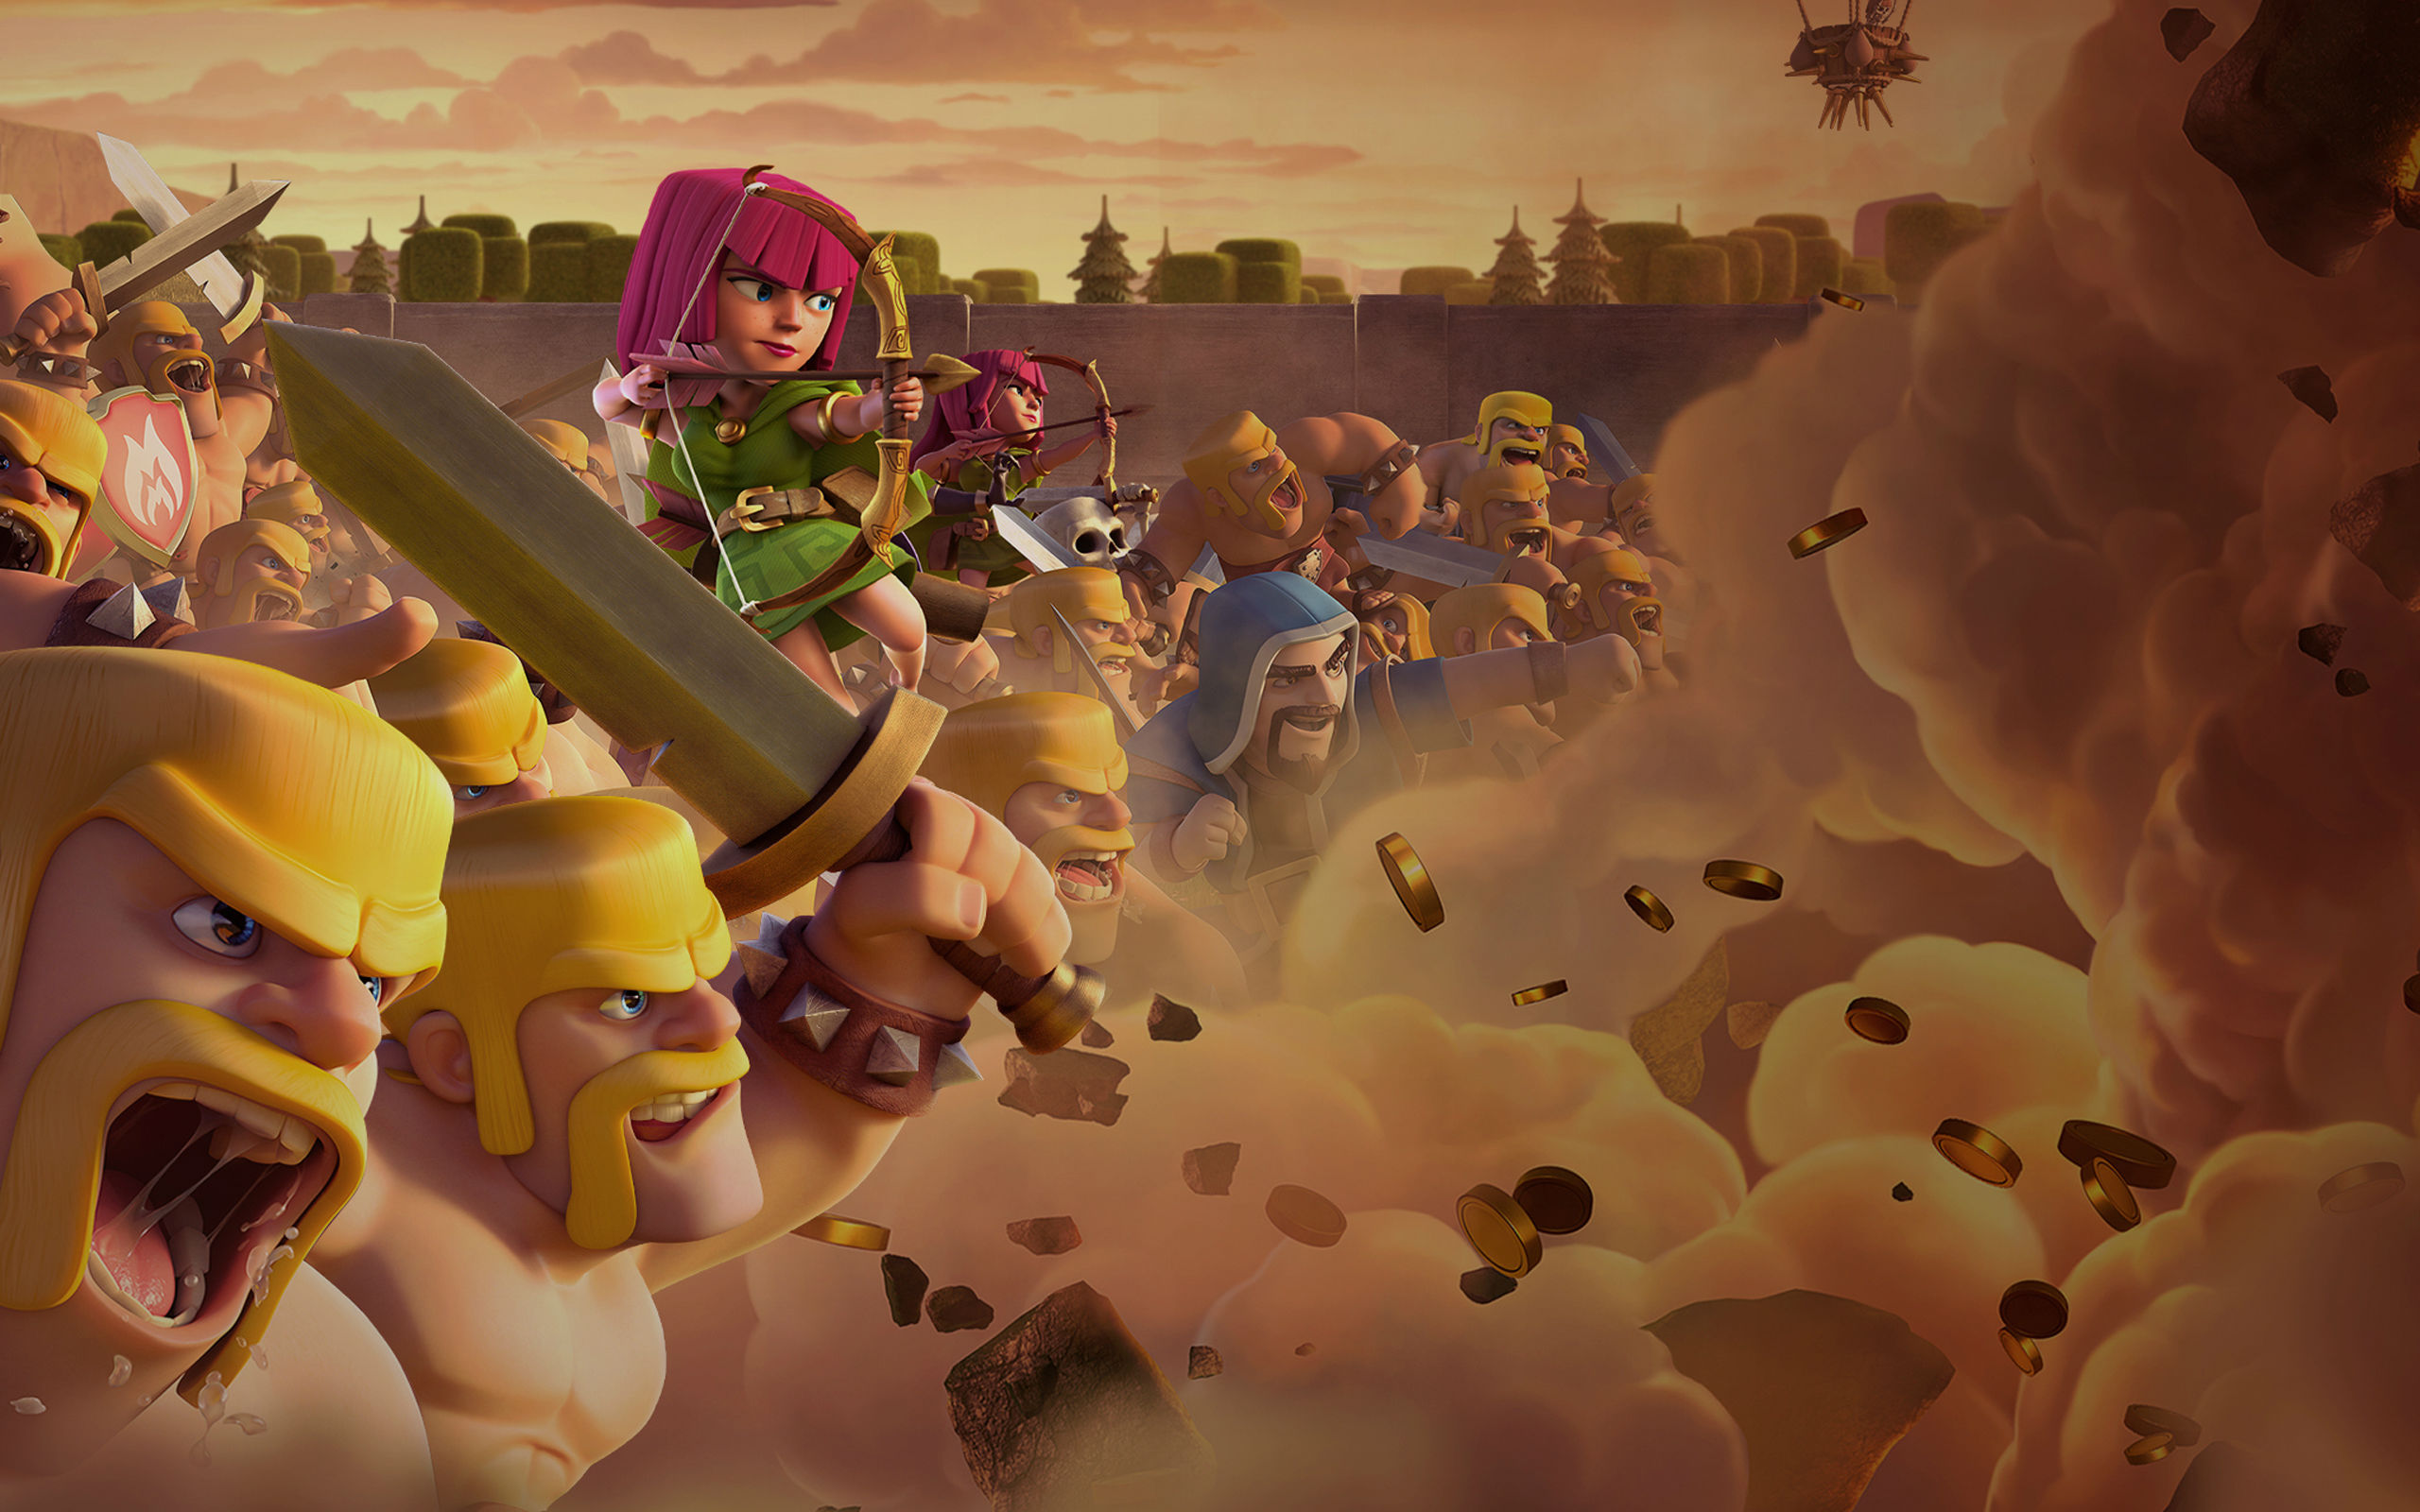 Clash Of Clans 4k Wallpapers Wallpaper Cave